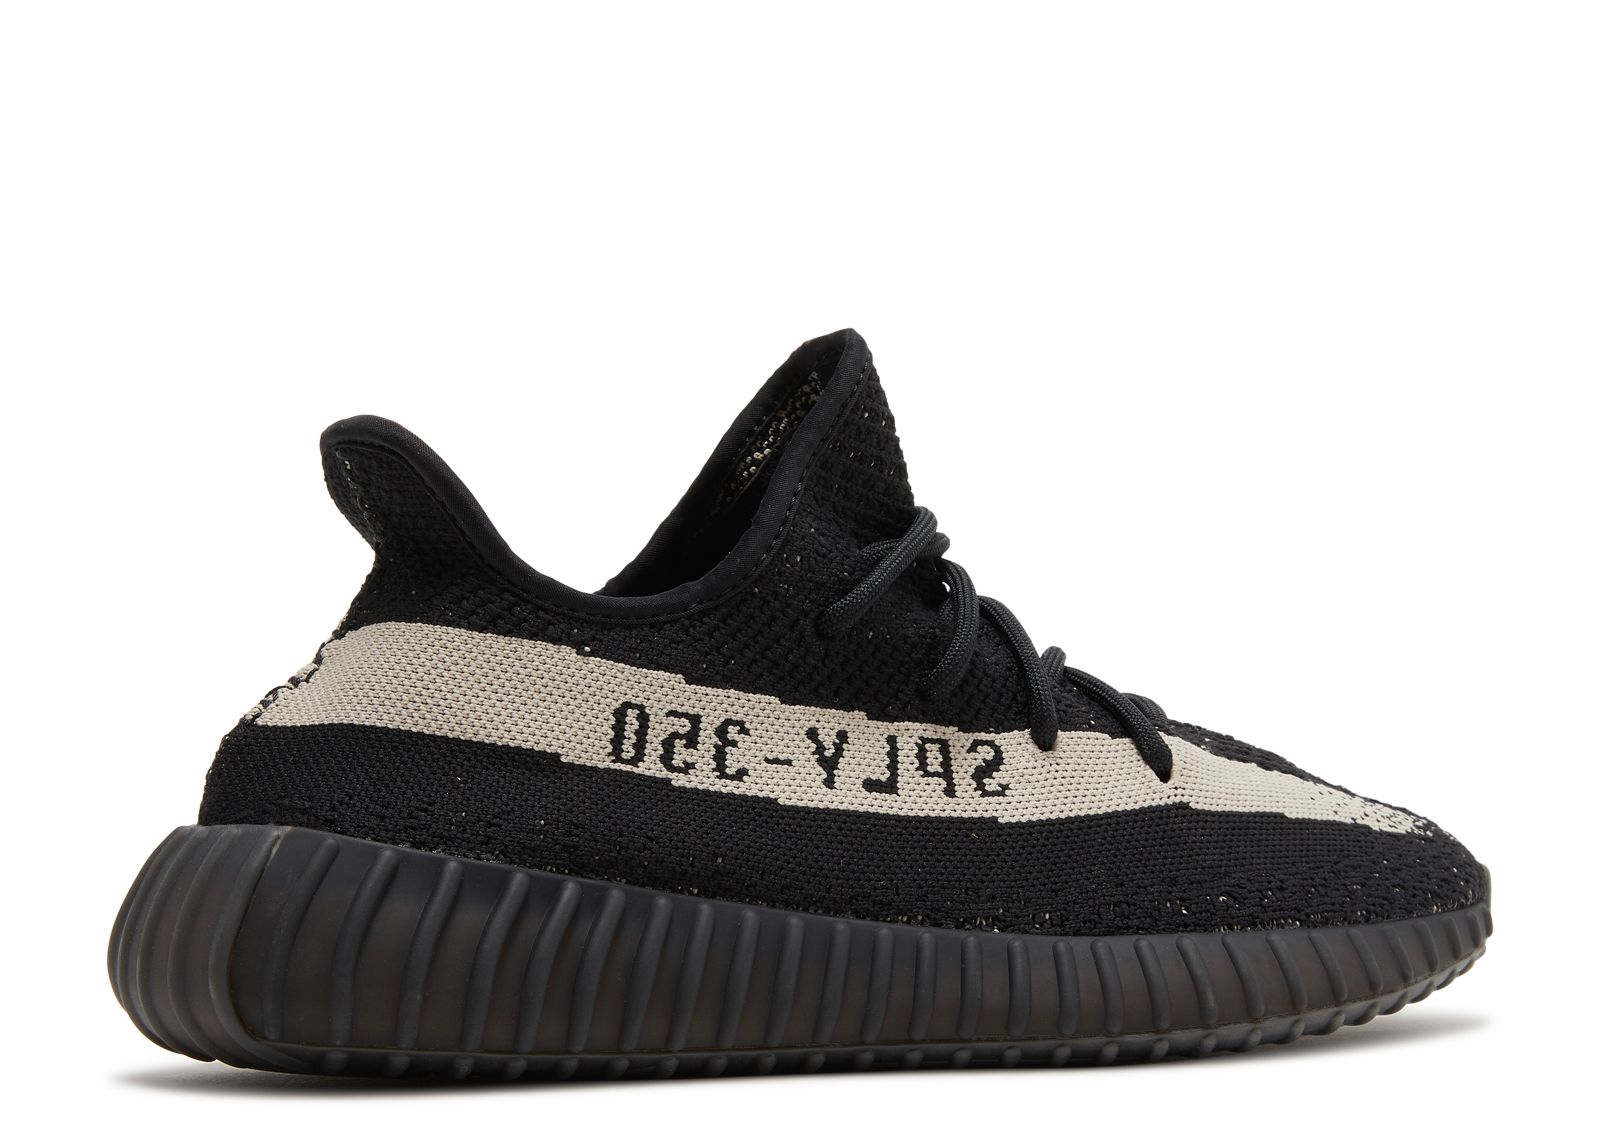 Adidas Yeezy Boost 350 V2 Infant Core Black/Core Black Red